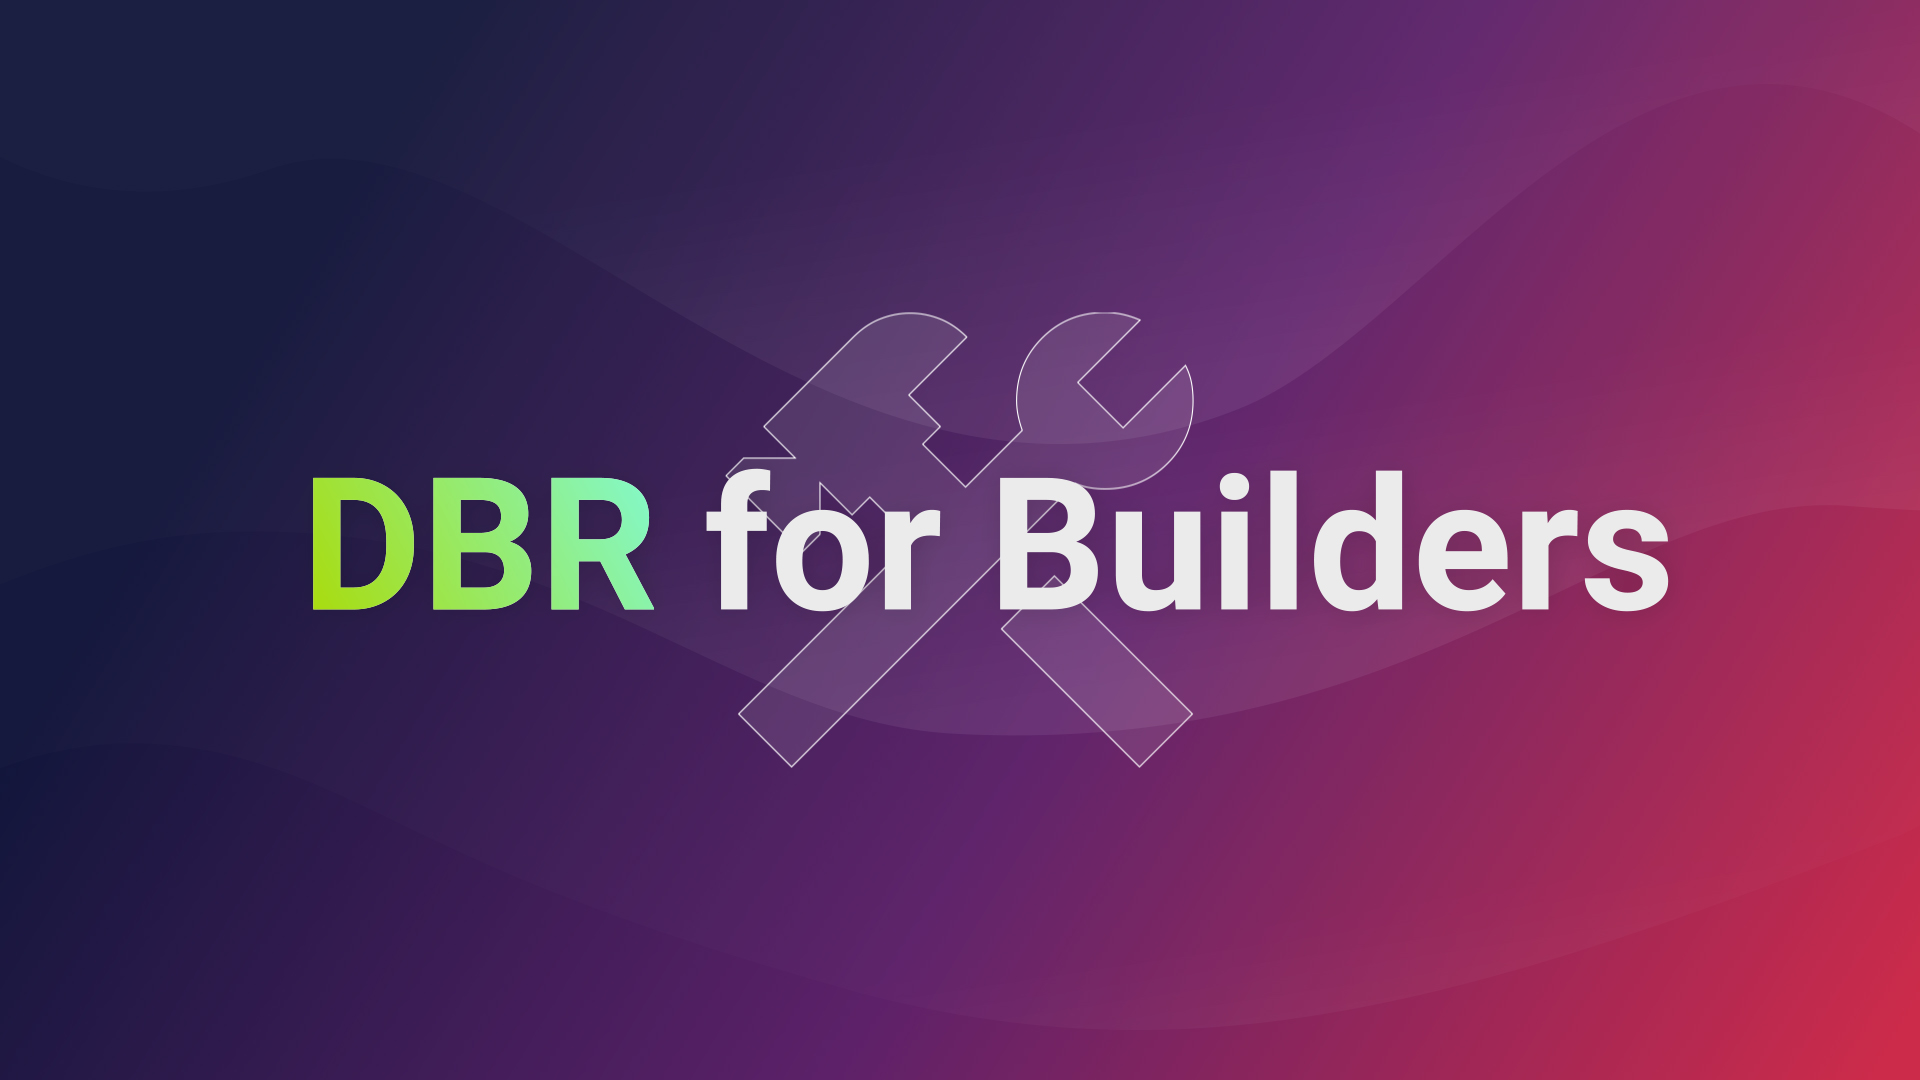 DBR for Builders